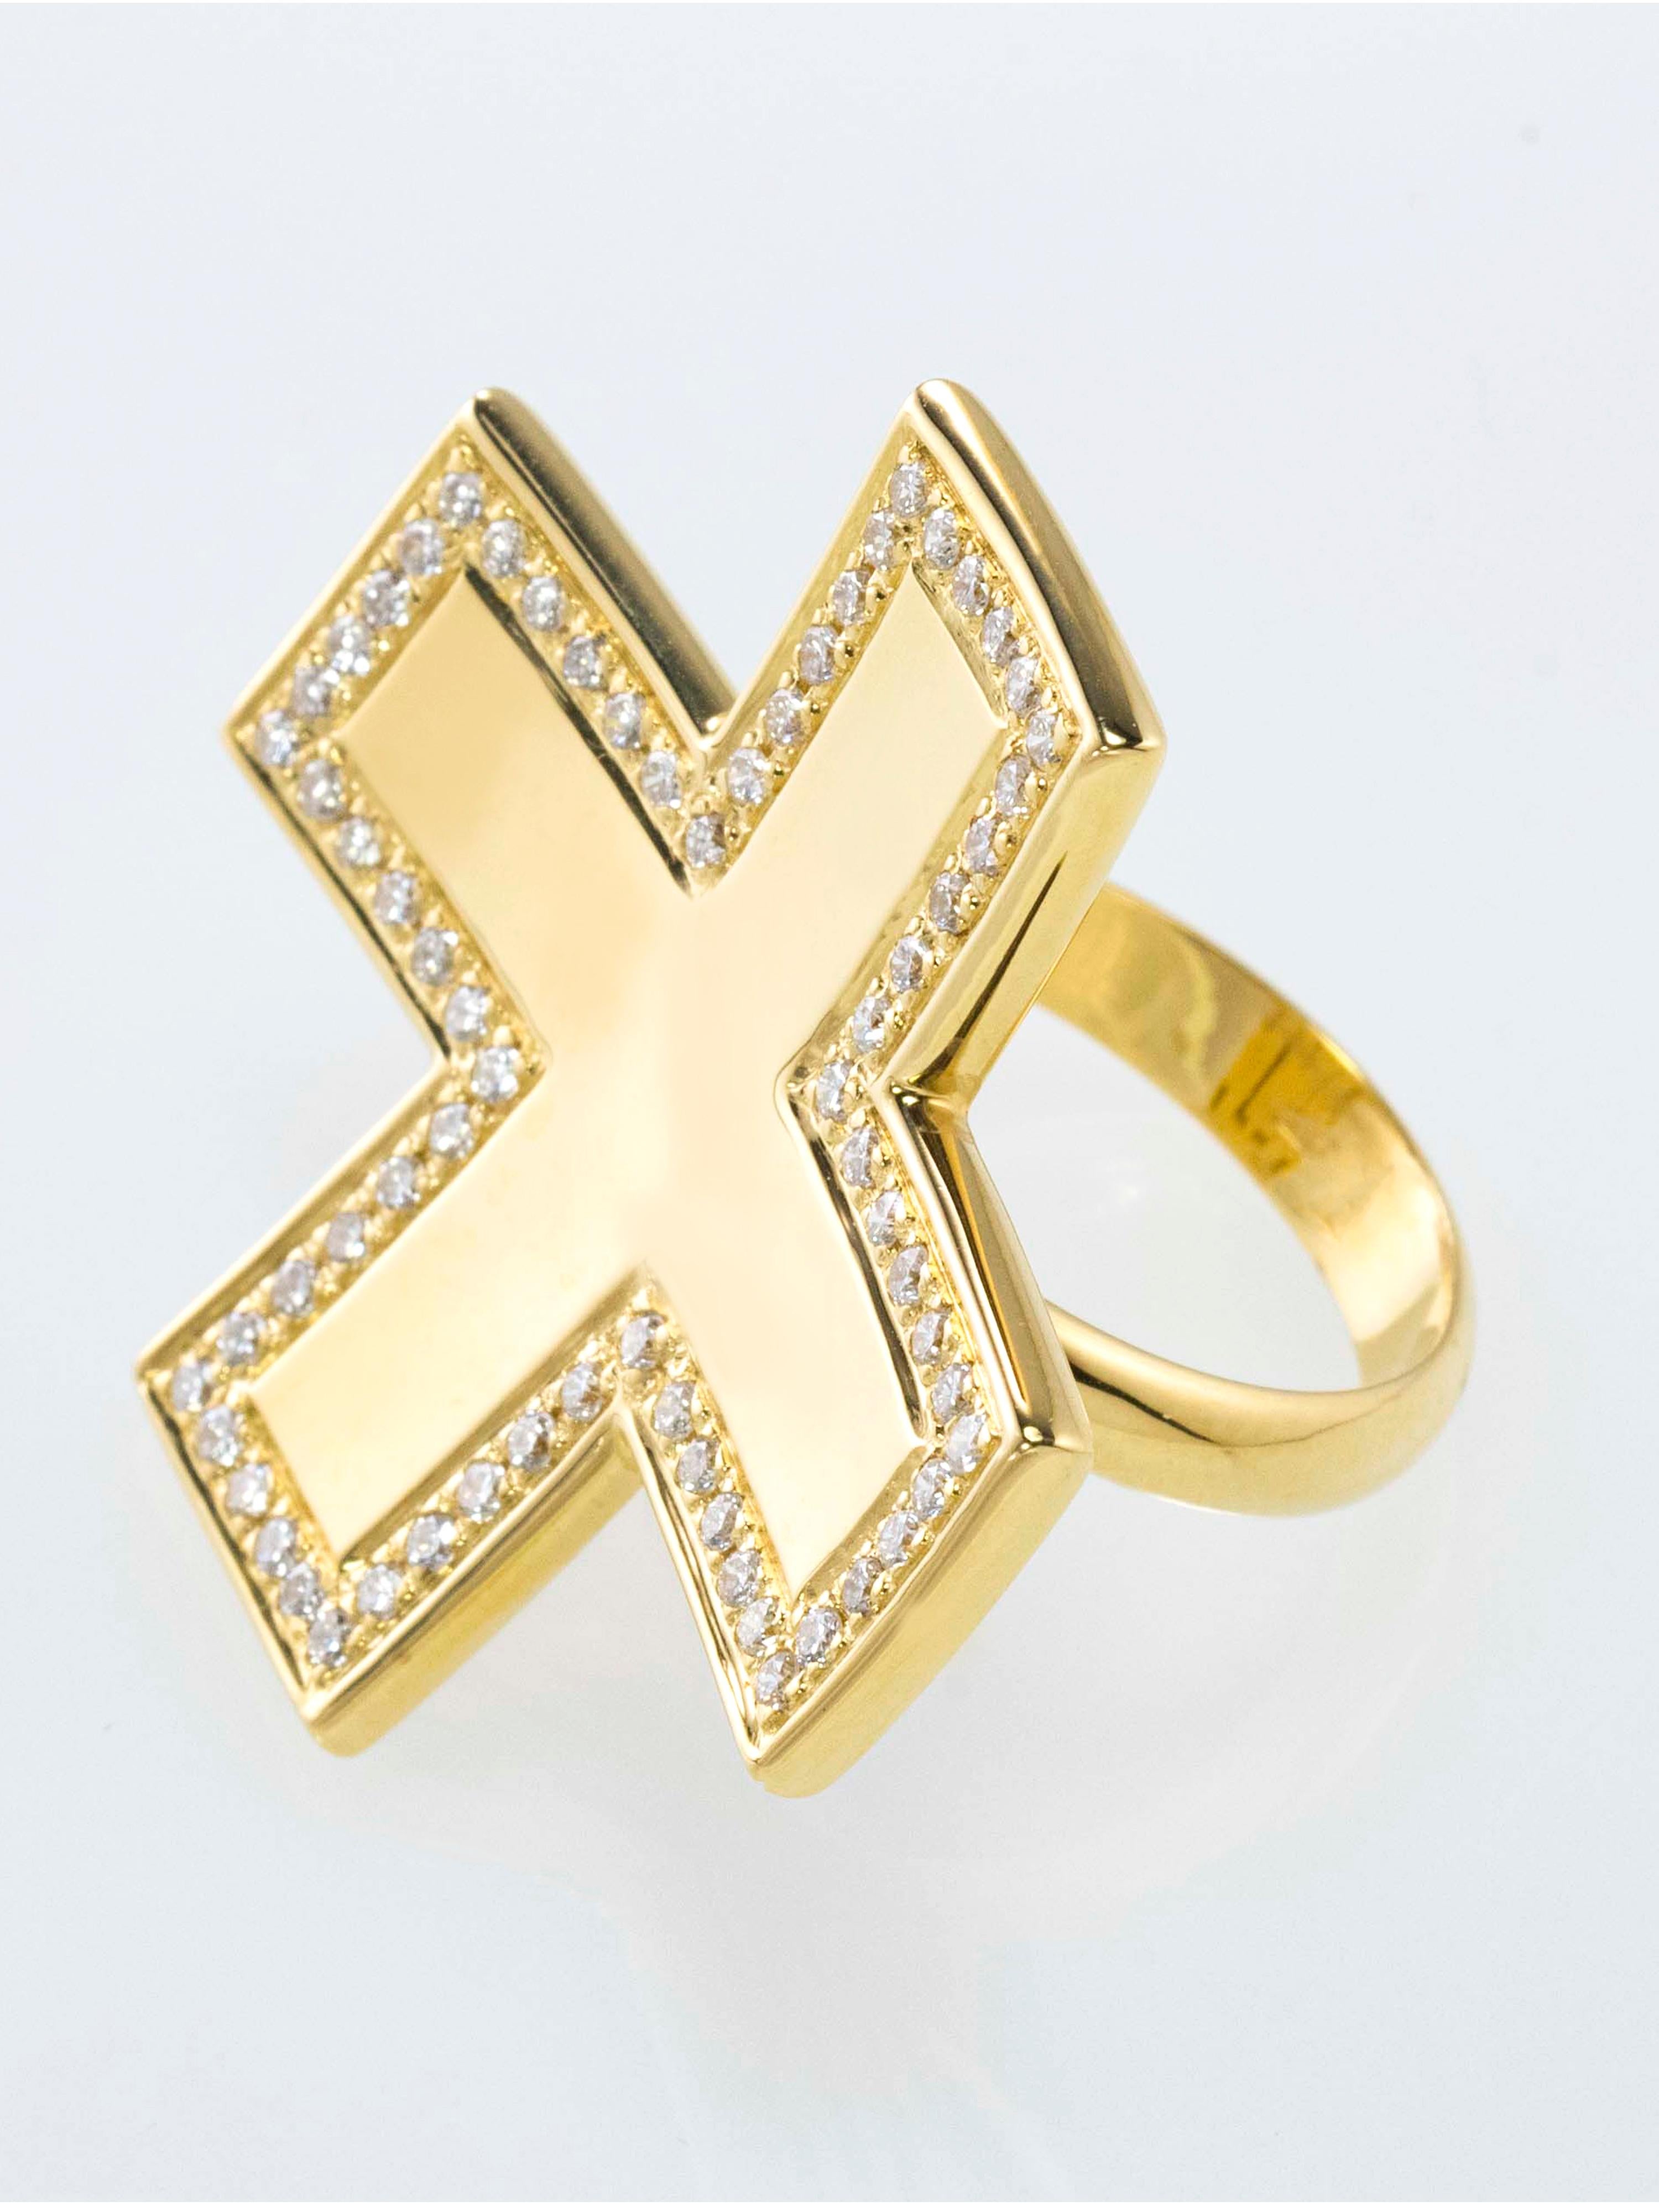 A solid 18 Kt gold and diamonds ring. The gold weighs gr 15.56

The cross design is enhanced by a bright diamonds frame for ct 0.90.
The cross measures cm 3.20 x 3.20.

Size is 7 and it is resizable.
Made in Italy.